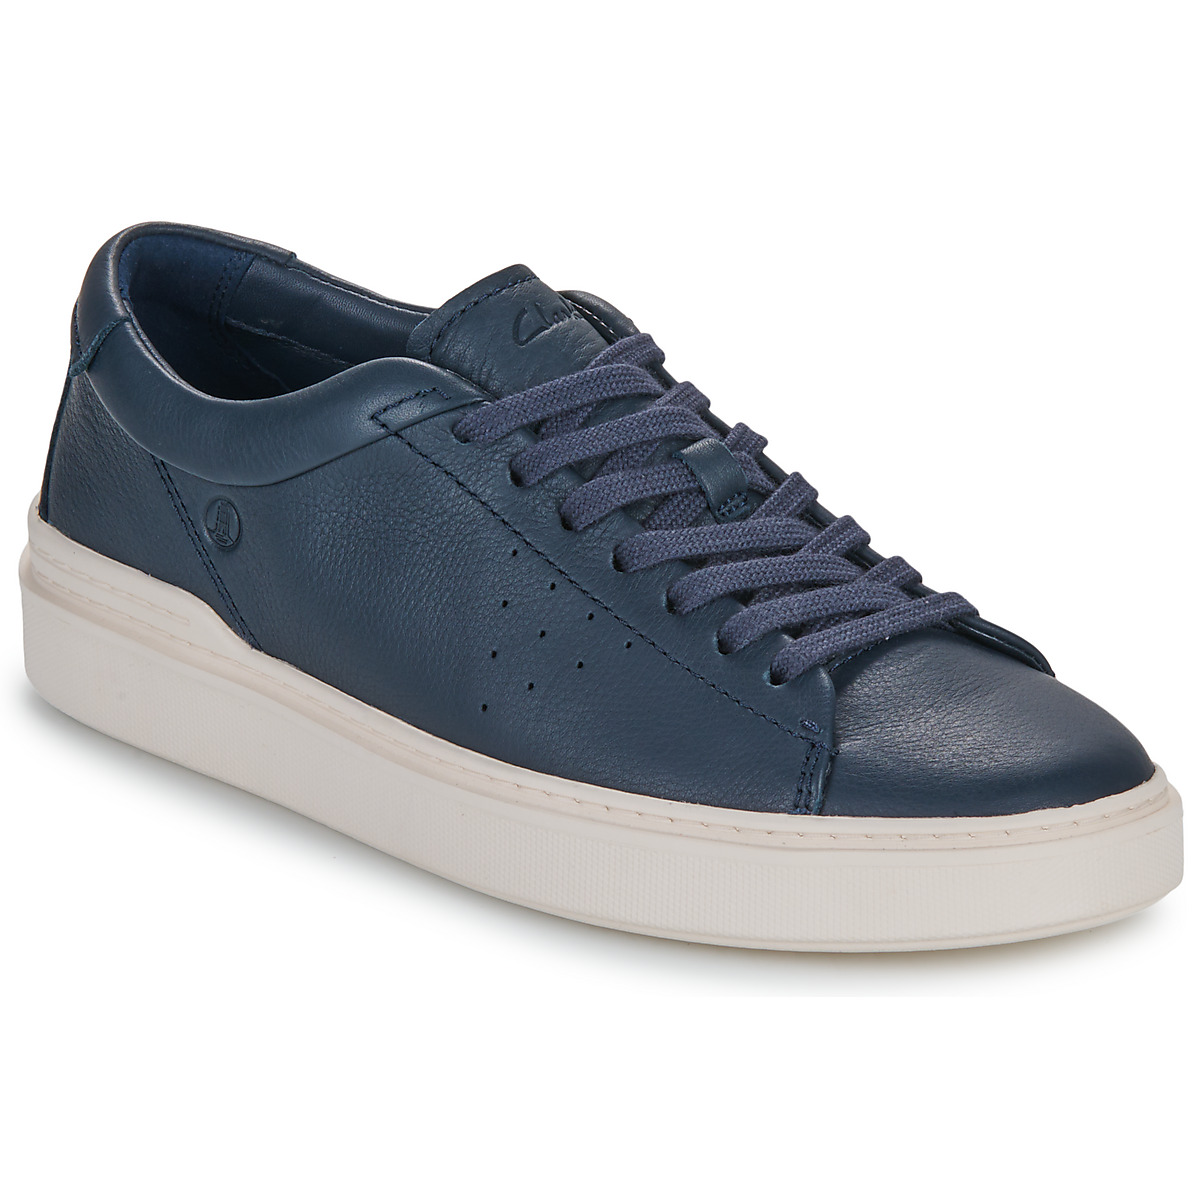 Chaussures Homme Les Petites Bombes CRAFT SWIFT Marine